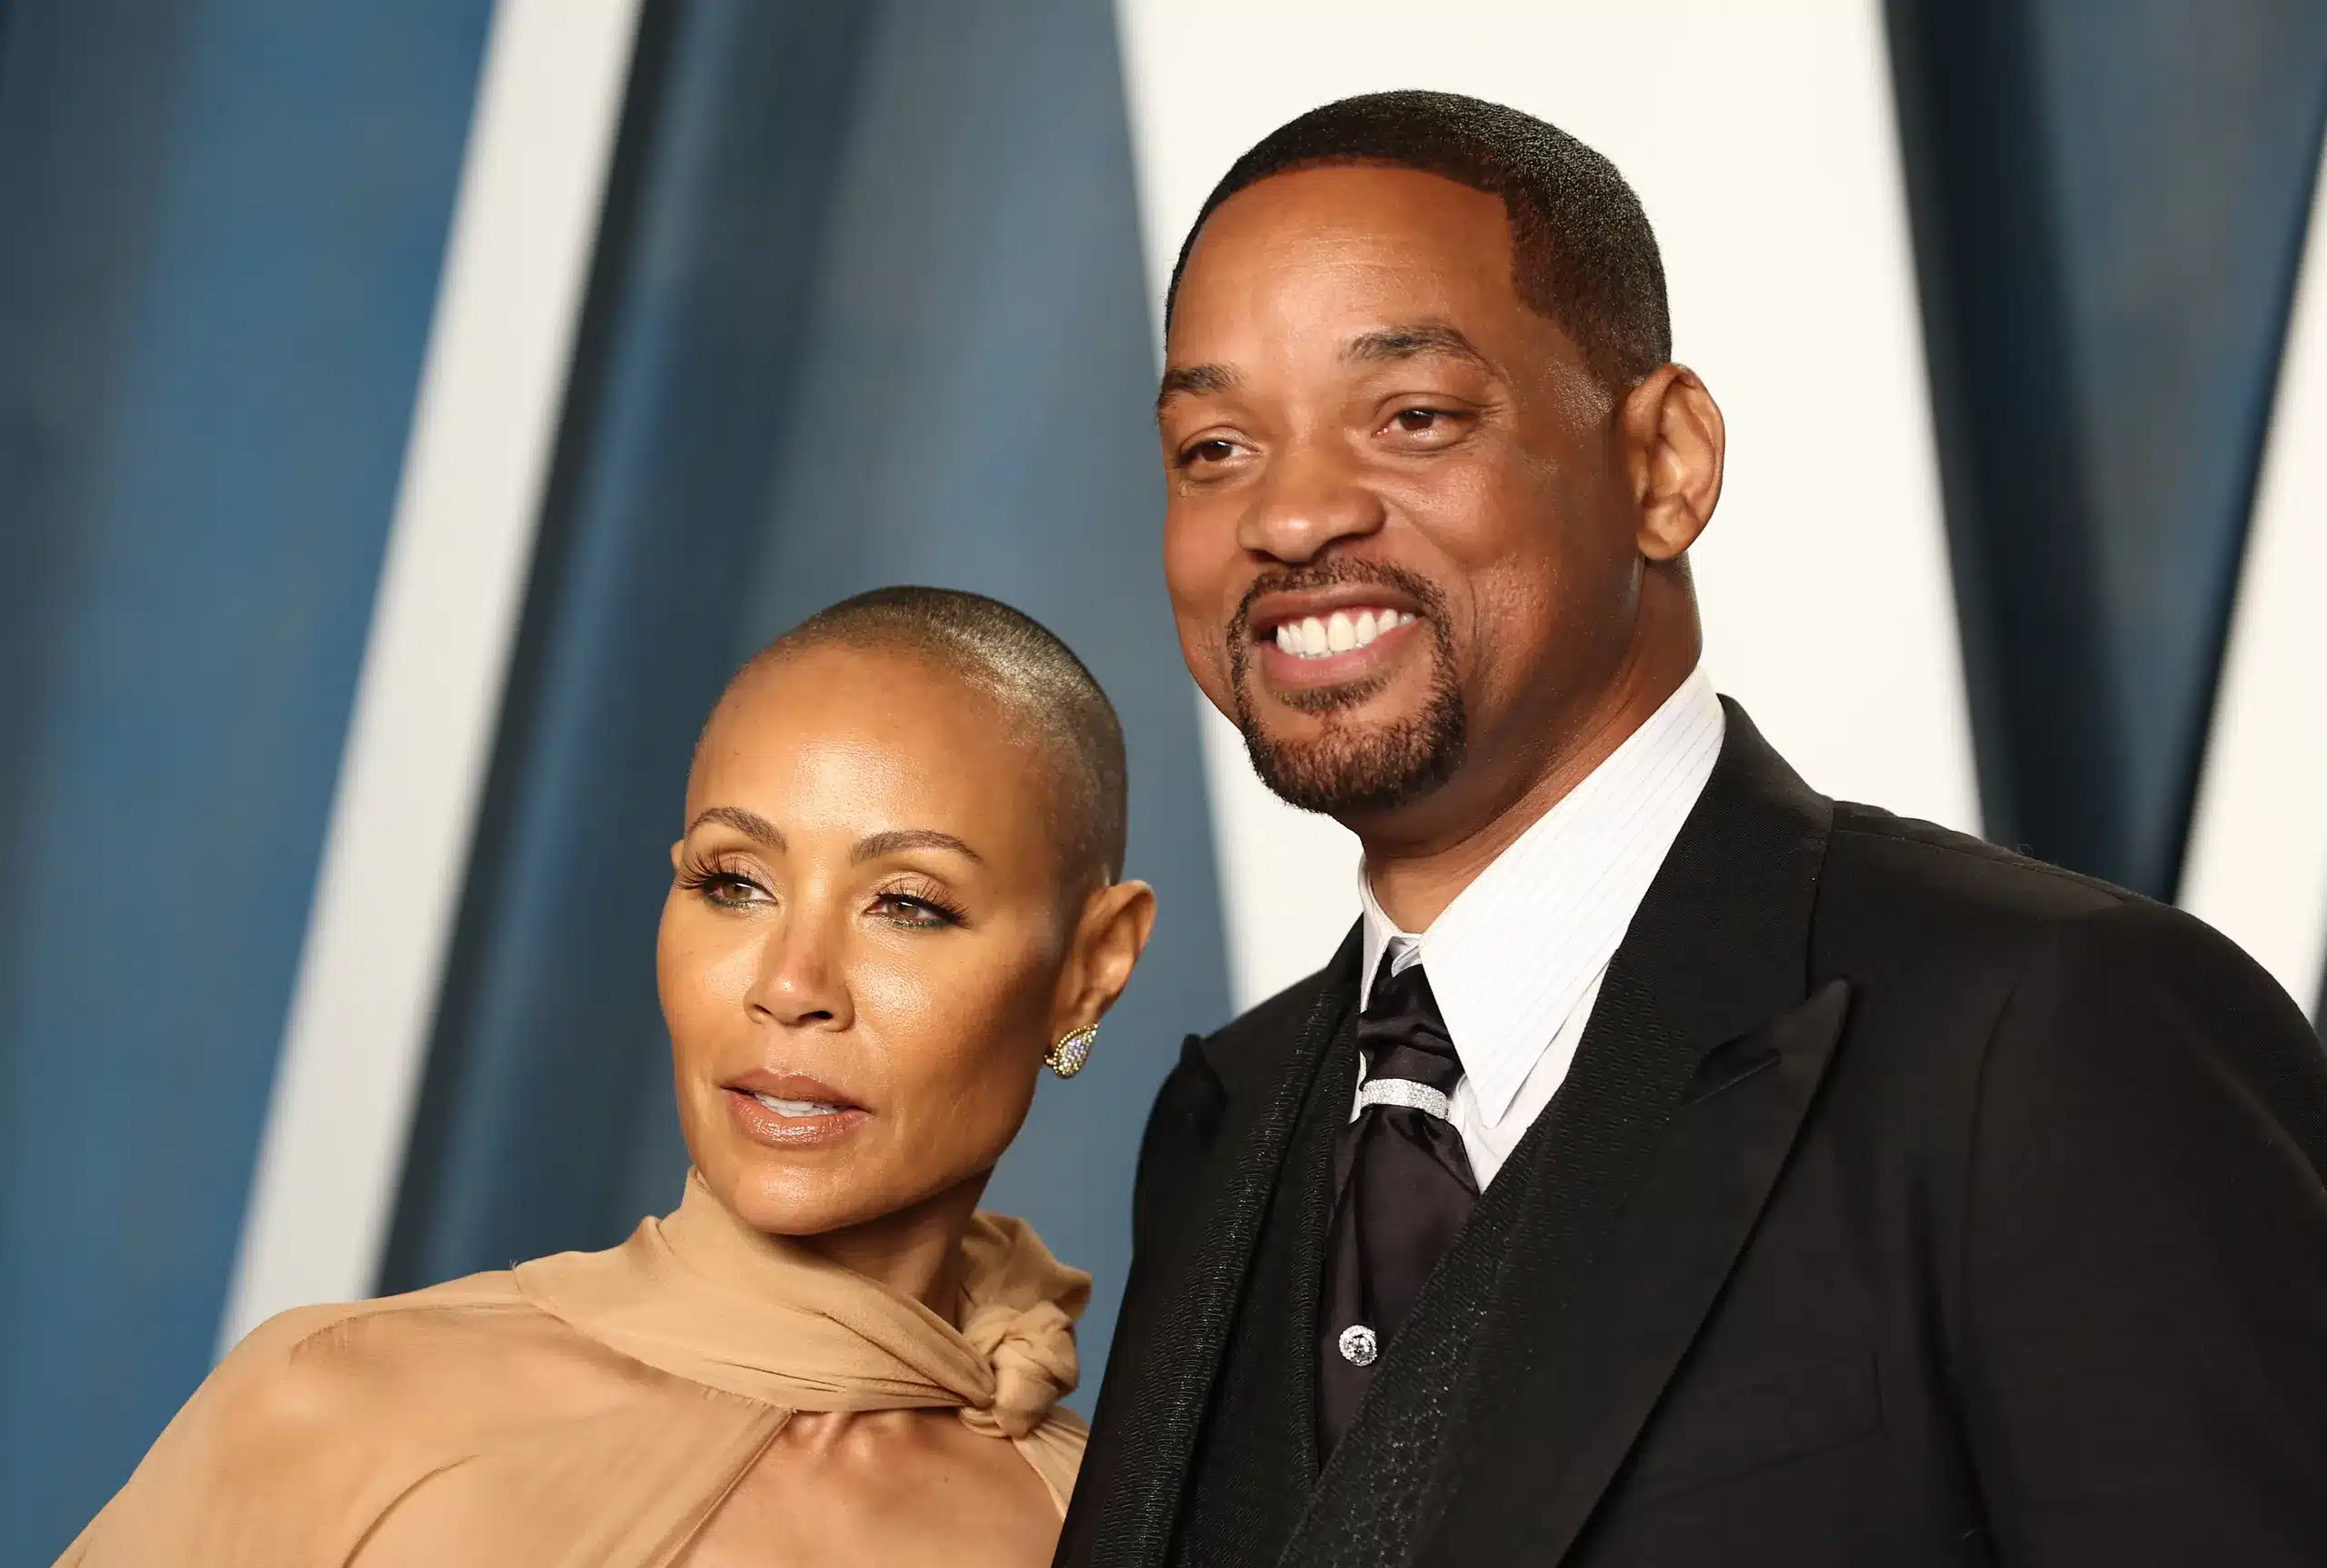 "Will Smith and I have been separated for 7 years" – Jada Pinkett Smith